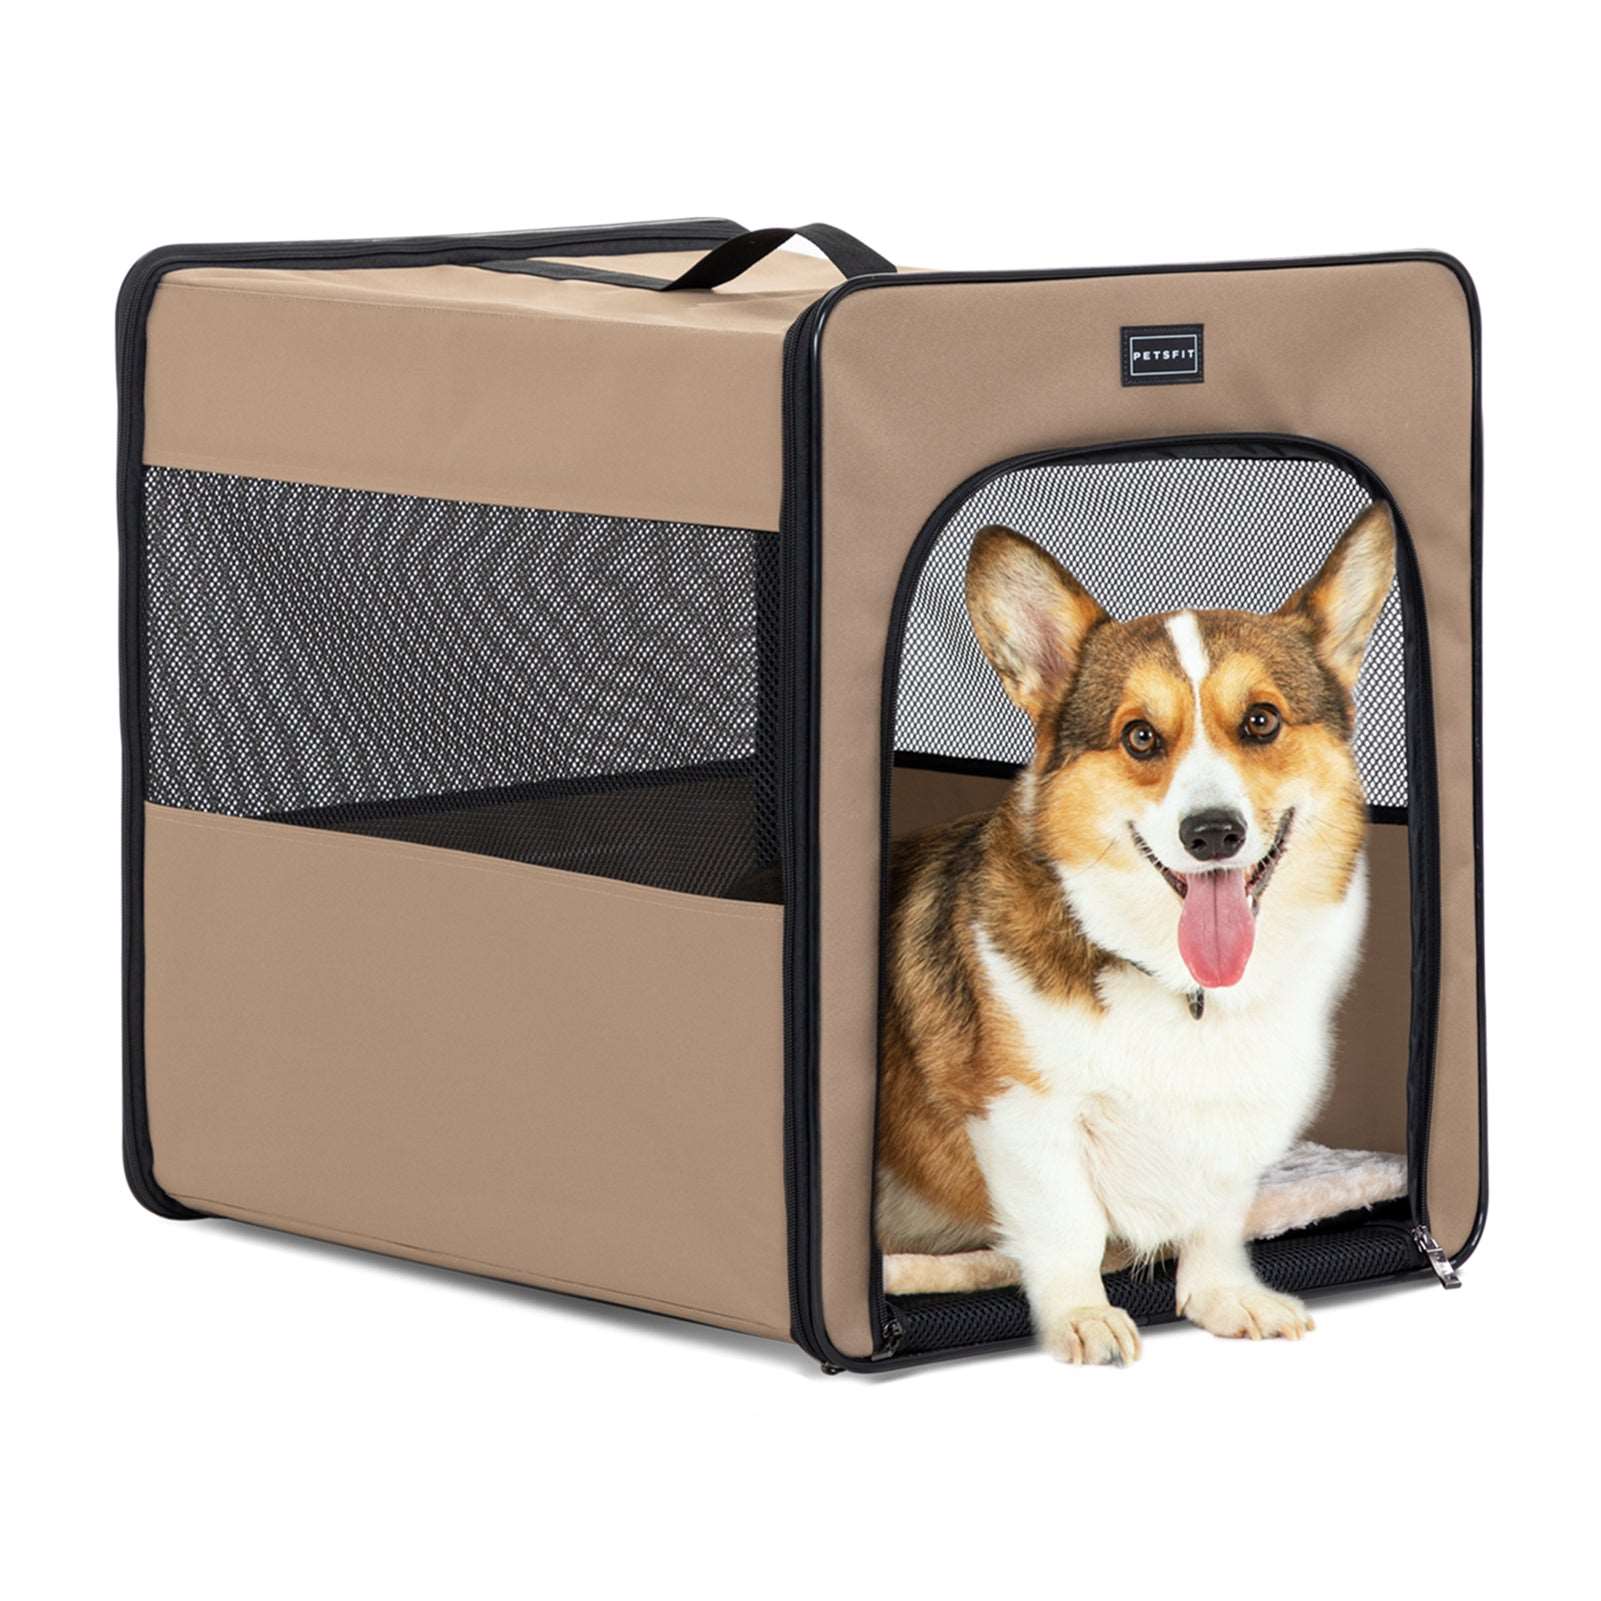 Petsfit-Portable-Dog-Crate-24-Inch-10